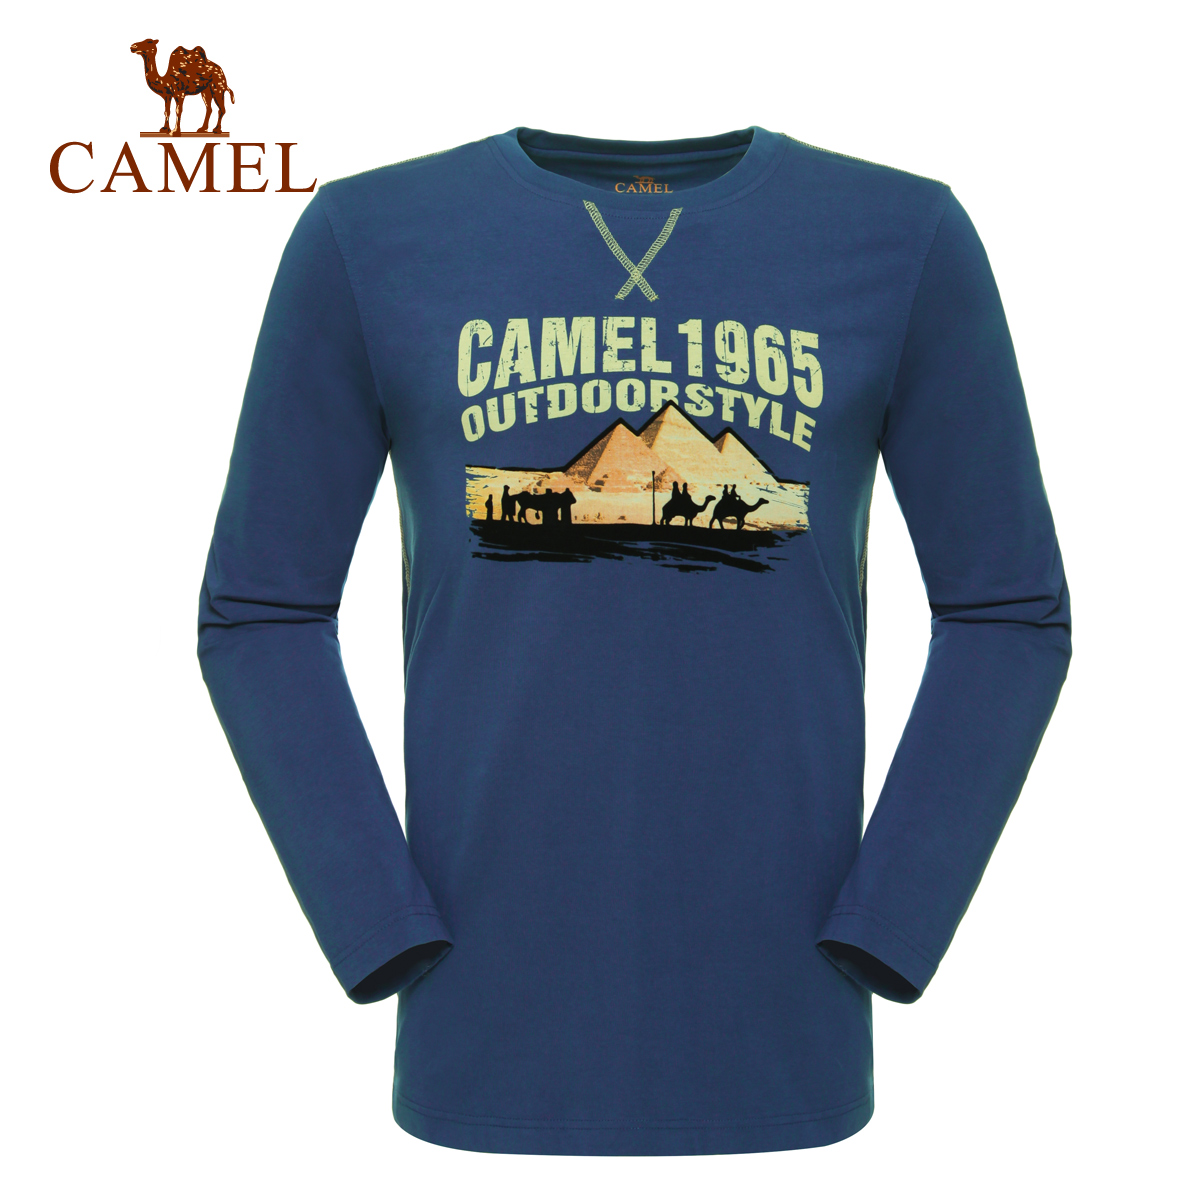 For camel outdoor casual clothing male casual long-sleeve round neck T-shirt a4w209223